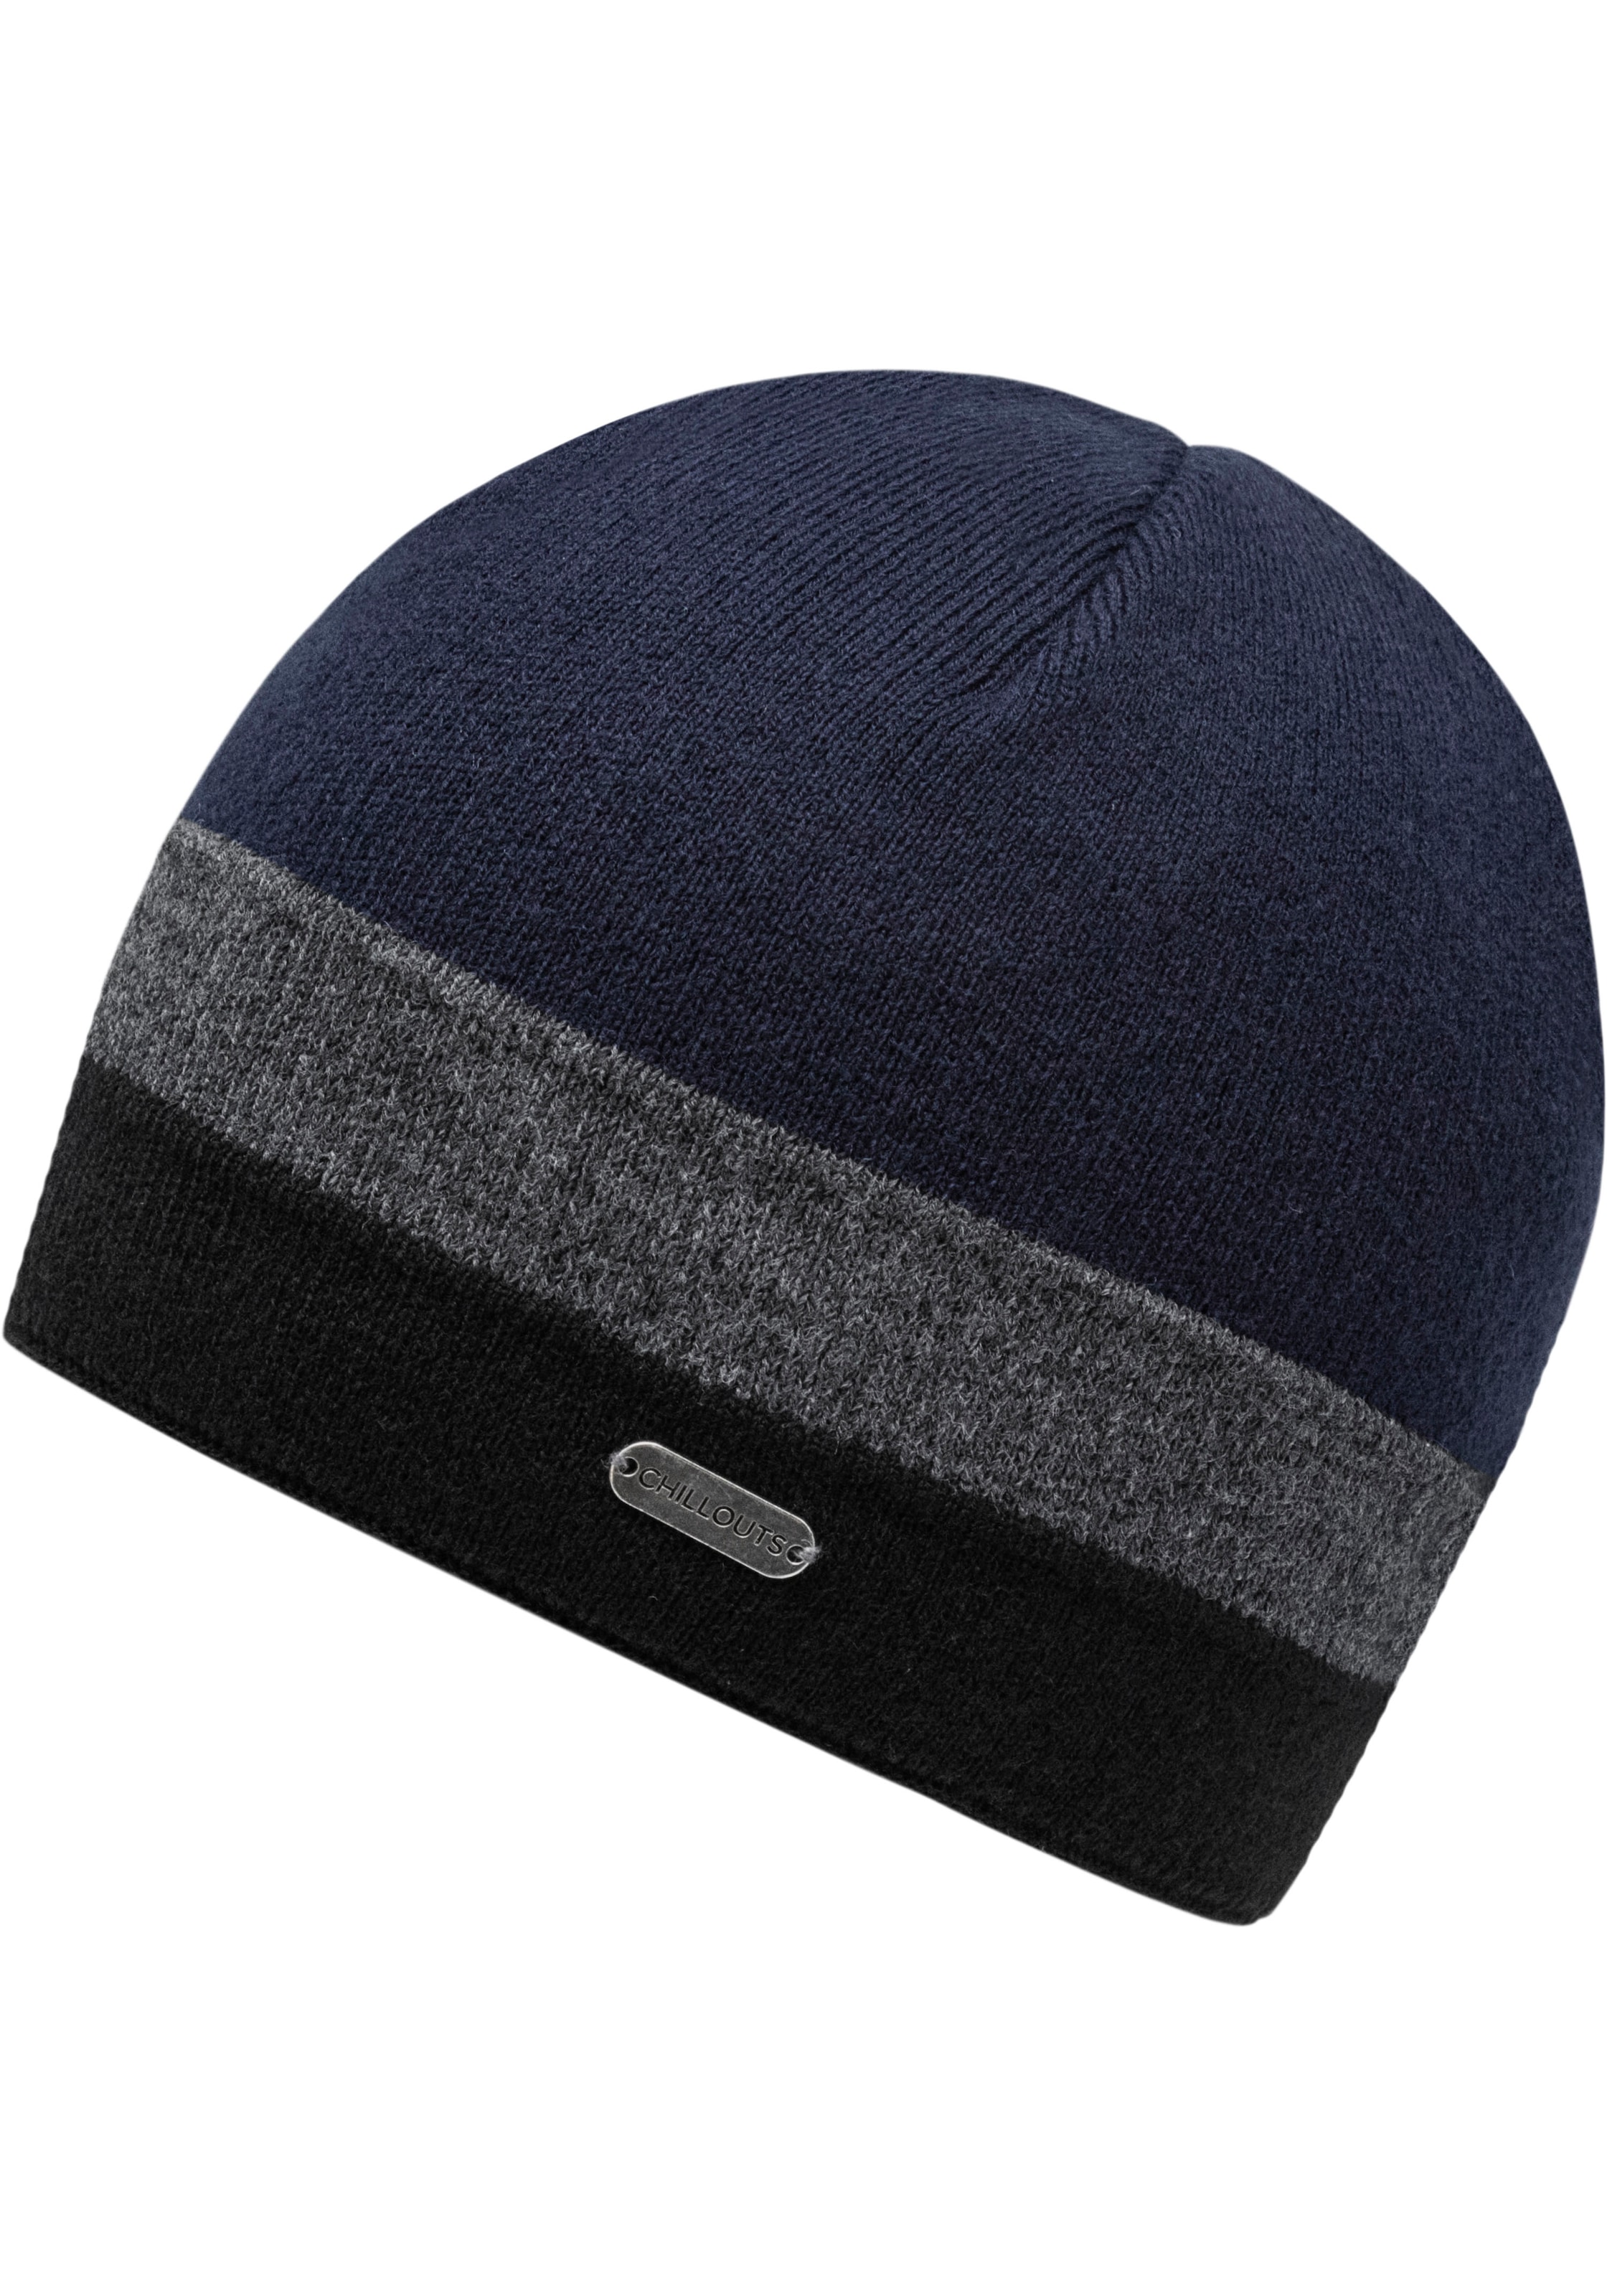 UNIVERSAL Beanie kaufen Johnny chillouts Hat«, »Johnny | Hat online